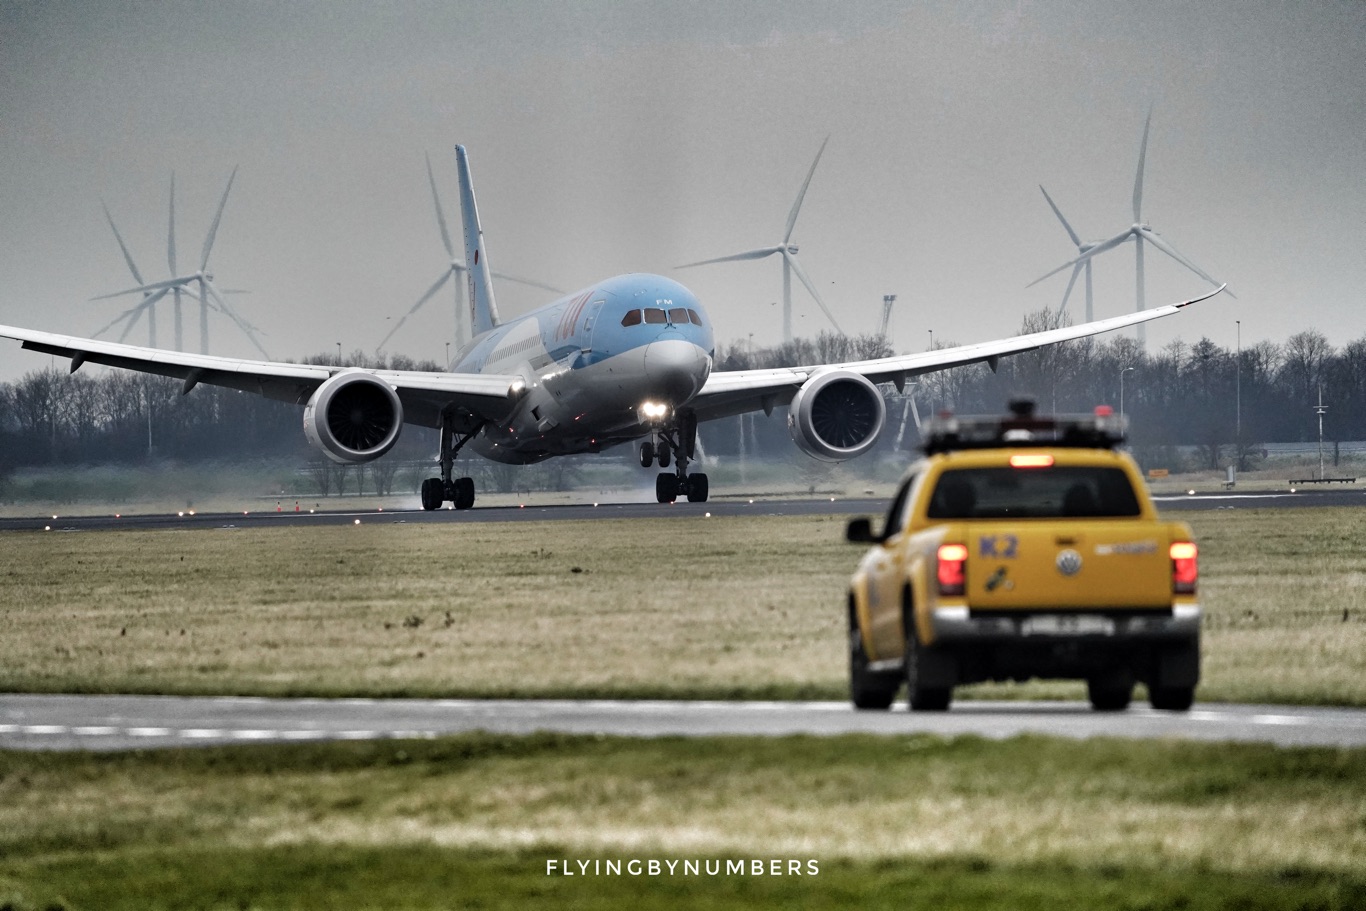 TUI 787 pilots landing manually at Amsterdam airport with nearby yellow vehicle